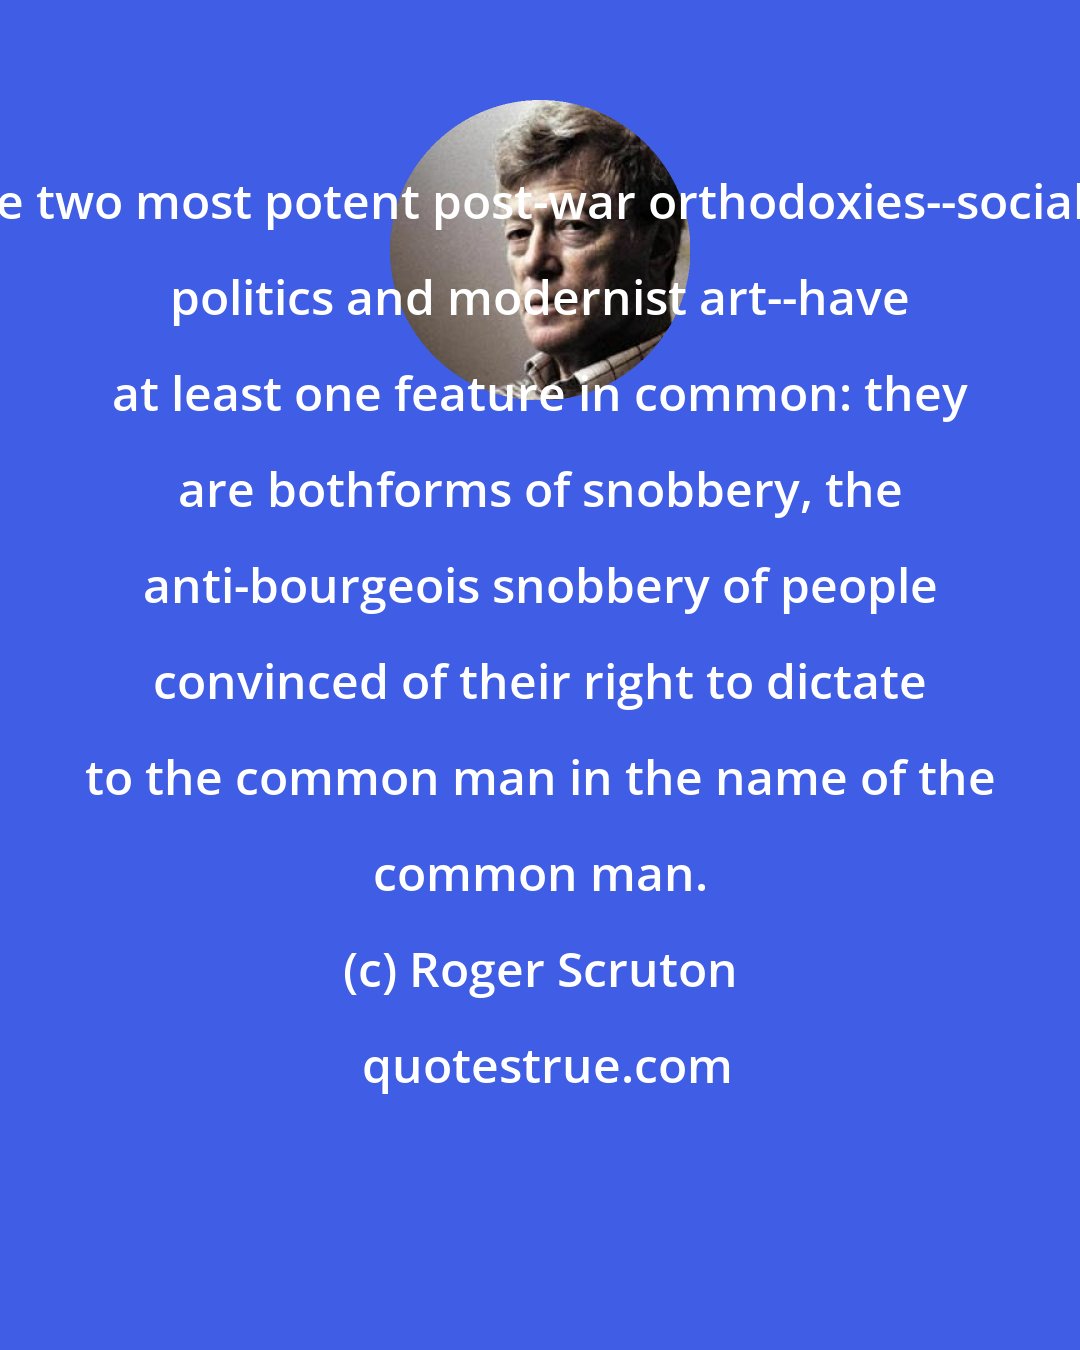 Roger Scruton: The two most potent post-war orthodoxies--socialist politics and modernist art--have at least one feature in common: they are bothforms of snobbery, the anti-bourgeois snobbery of people convinced of their right to dictate to the common man in the name of the common man.